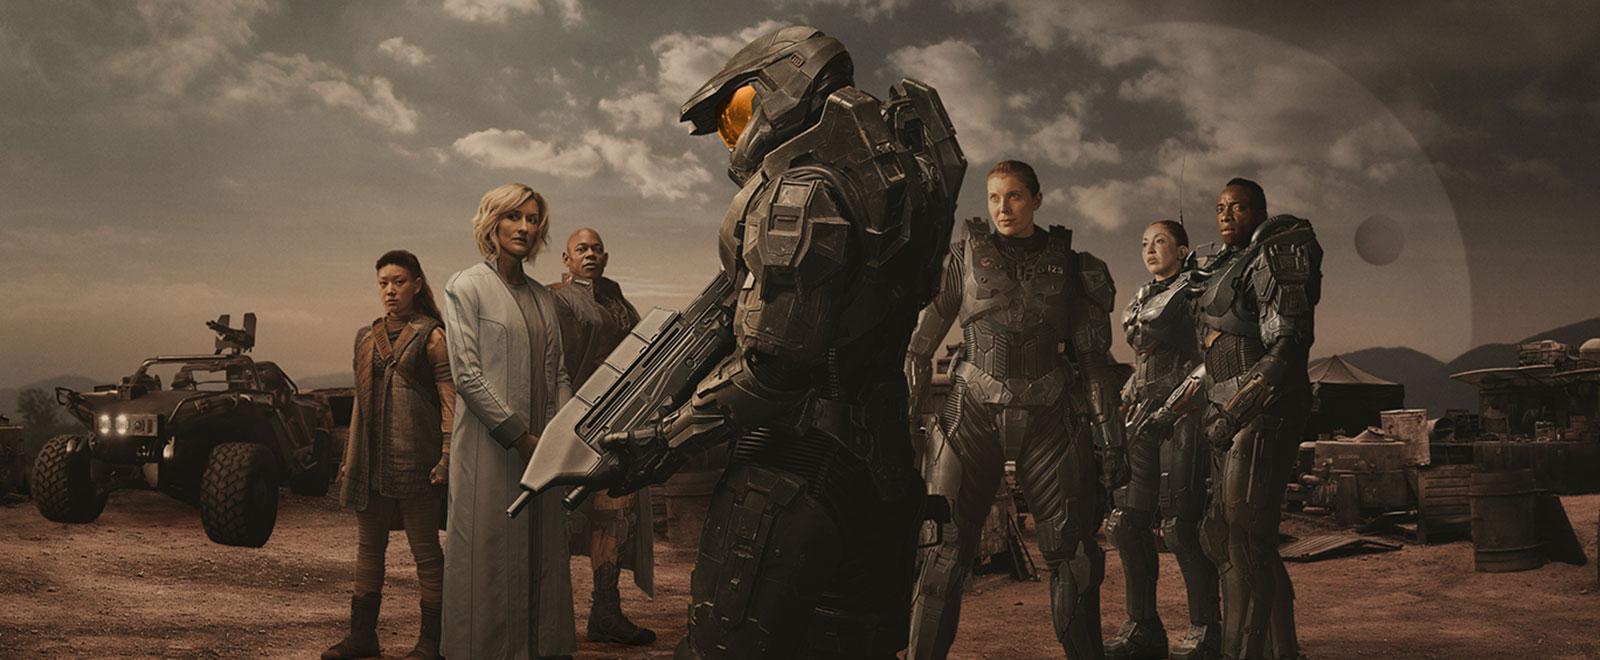 Image for Halo series premiere is the biggest ever for Paramount+